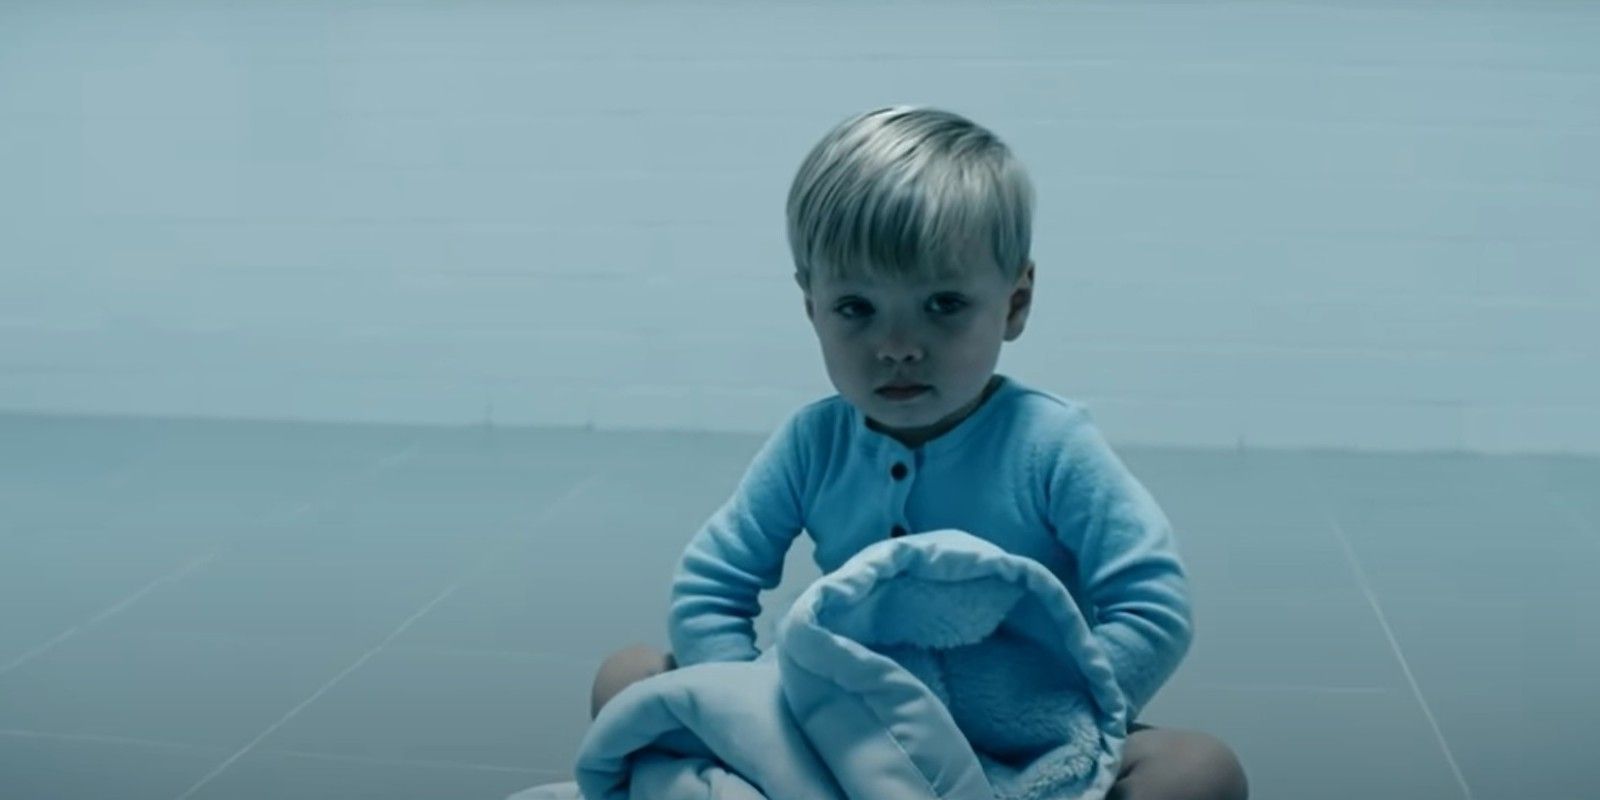 Homelander as an infant with his blanket in The Boys